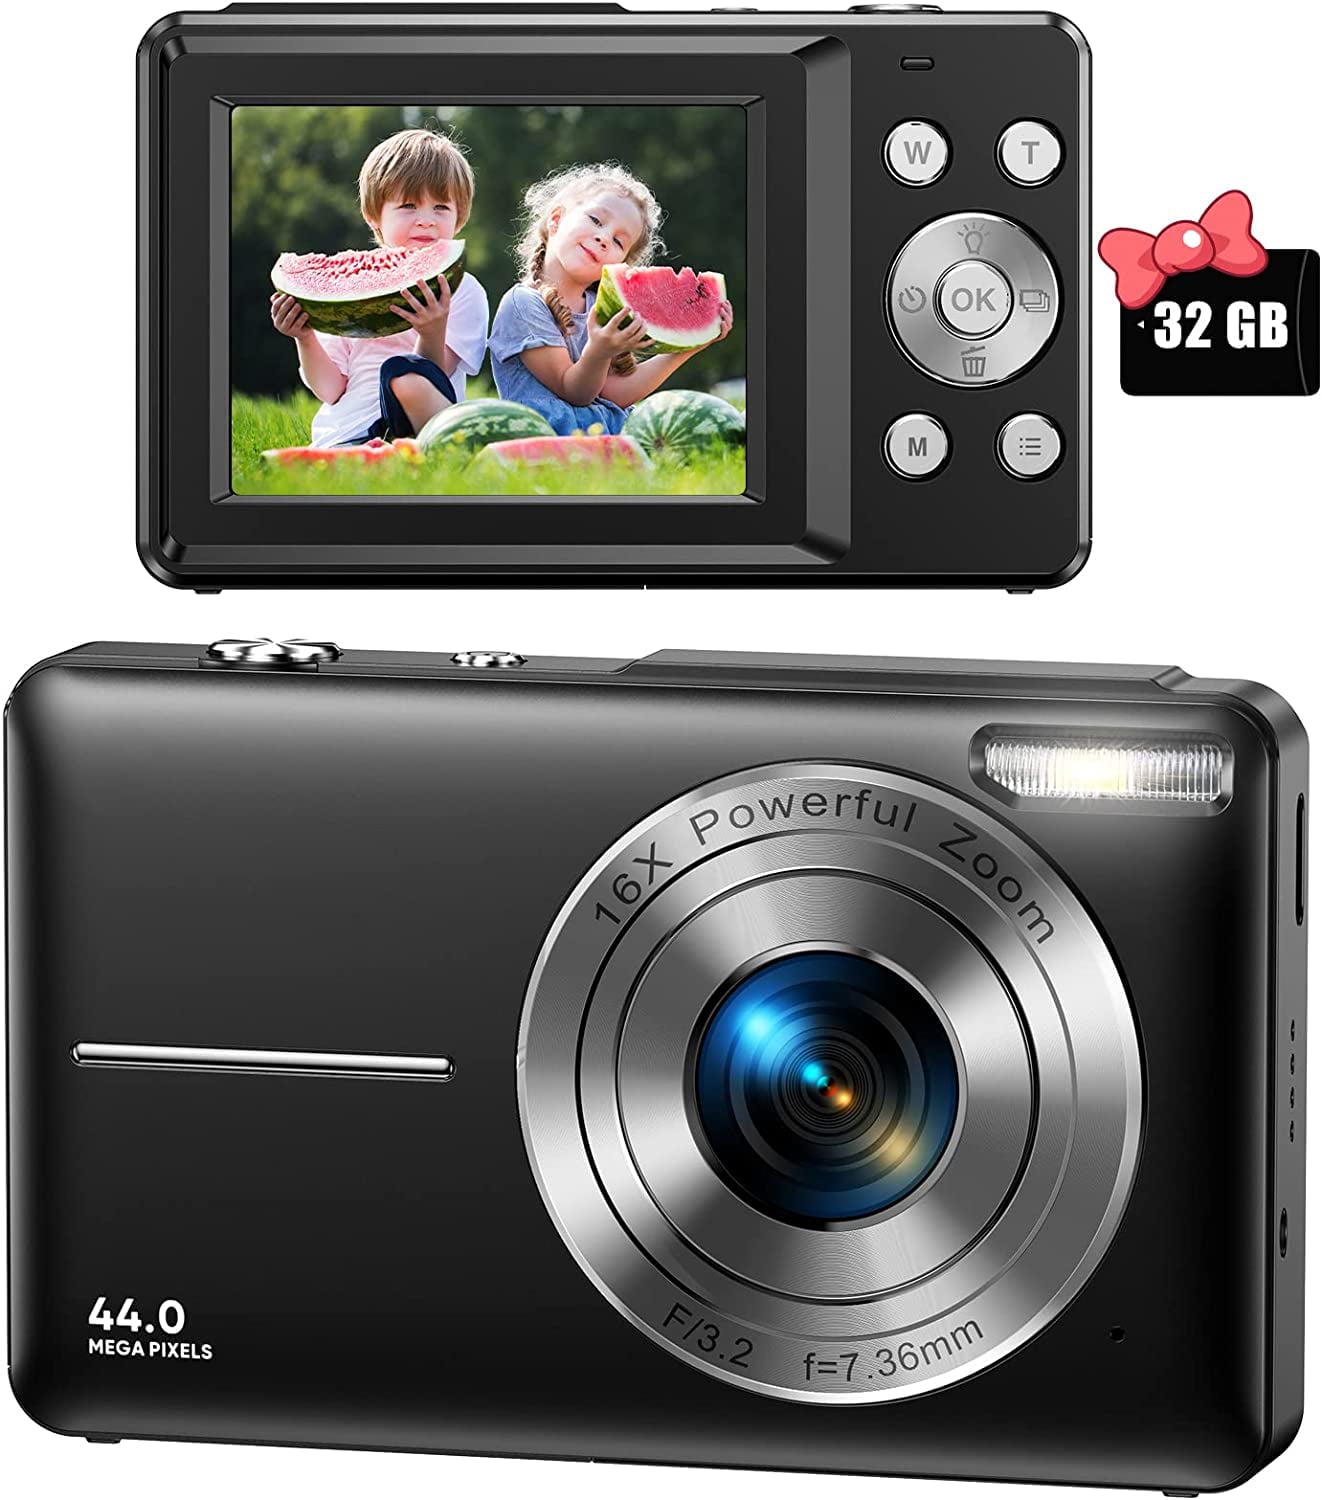 Kids Camera, Andoer Mini Kids Digital Camera 12MP 1080P HD Children  Creative Camera Video Camcorder 2 inch IPS Screen with 32GB Memory Card  Games Mode for Boys and Girls Kids (Blue Cow)